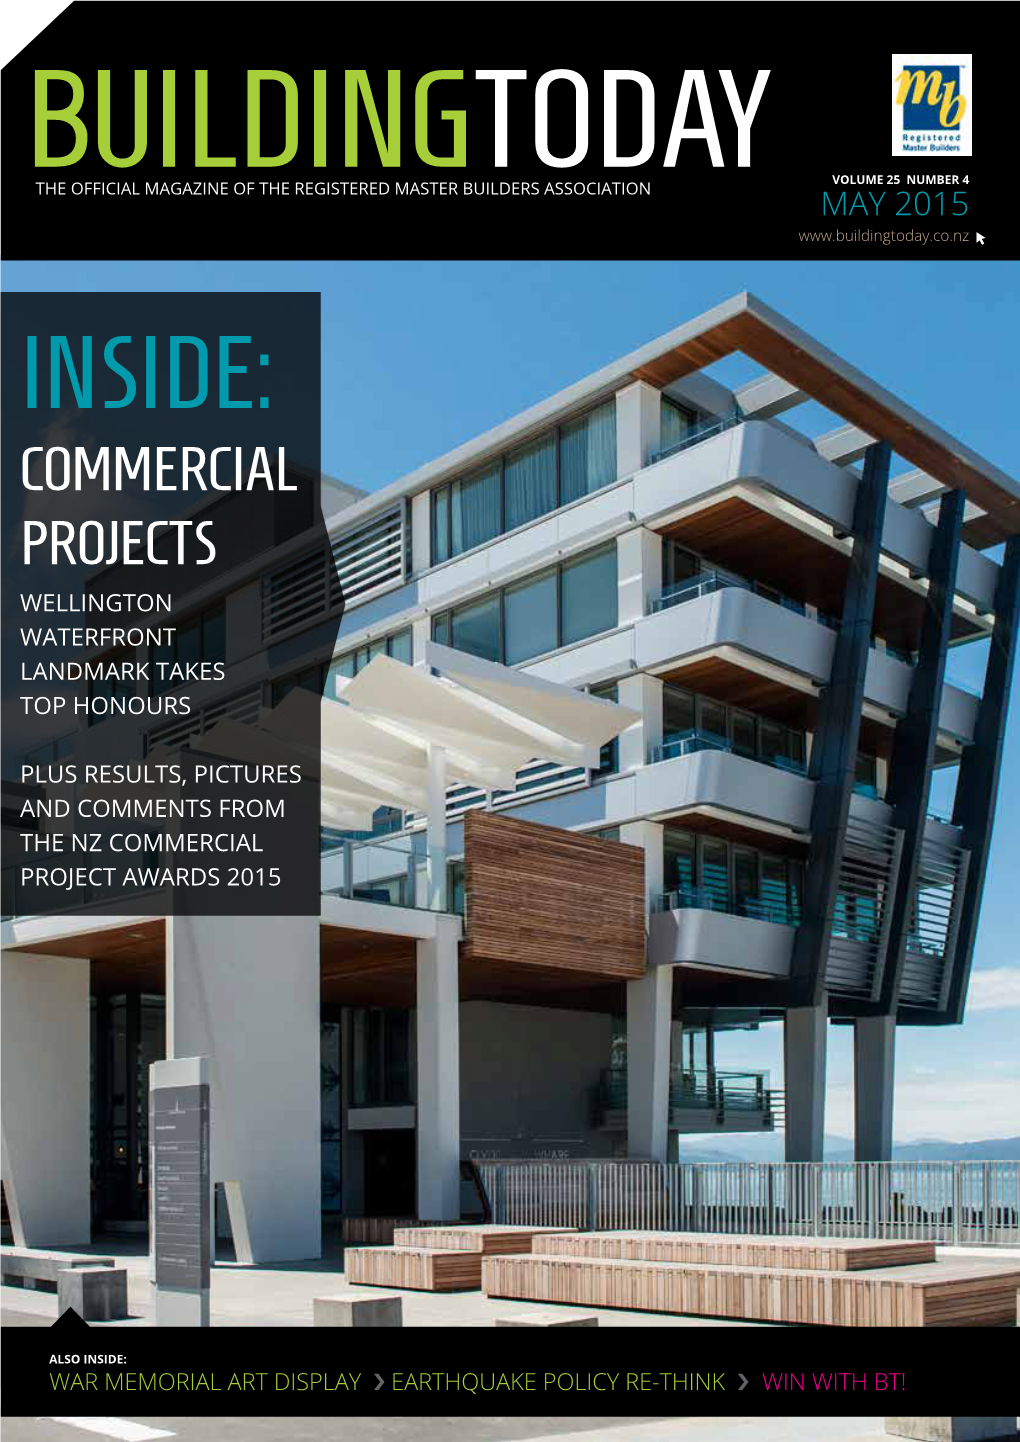 Inside: Commercial Projects Wellington Waterfront Landmark Takes Top Honours